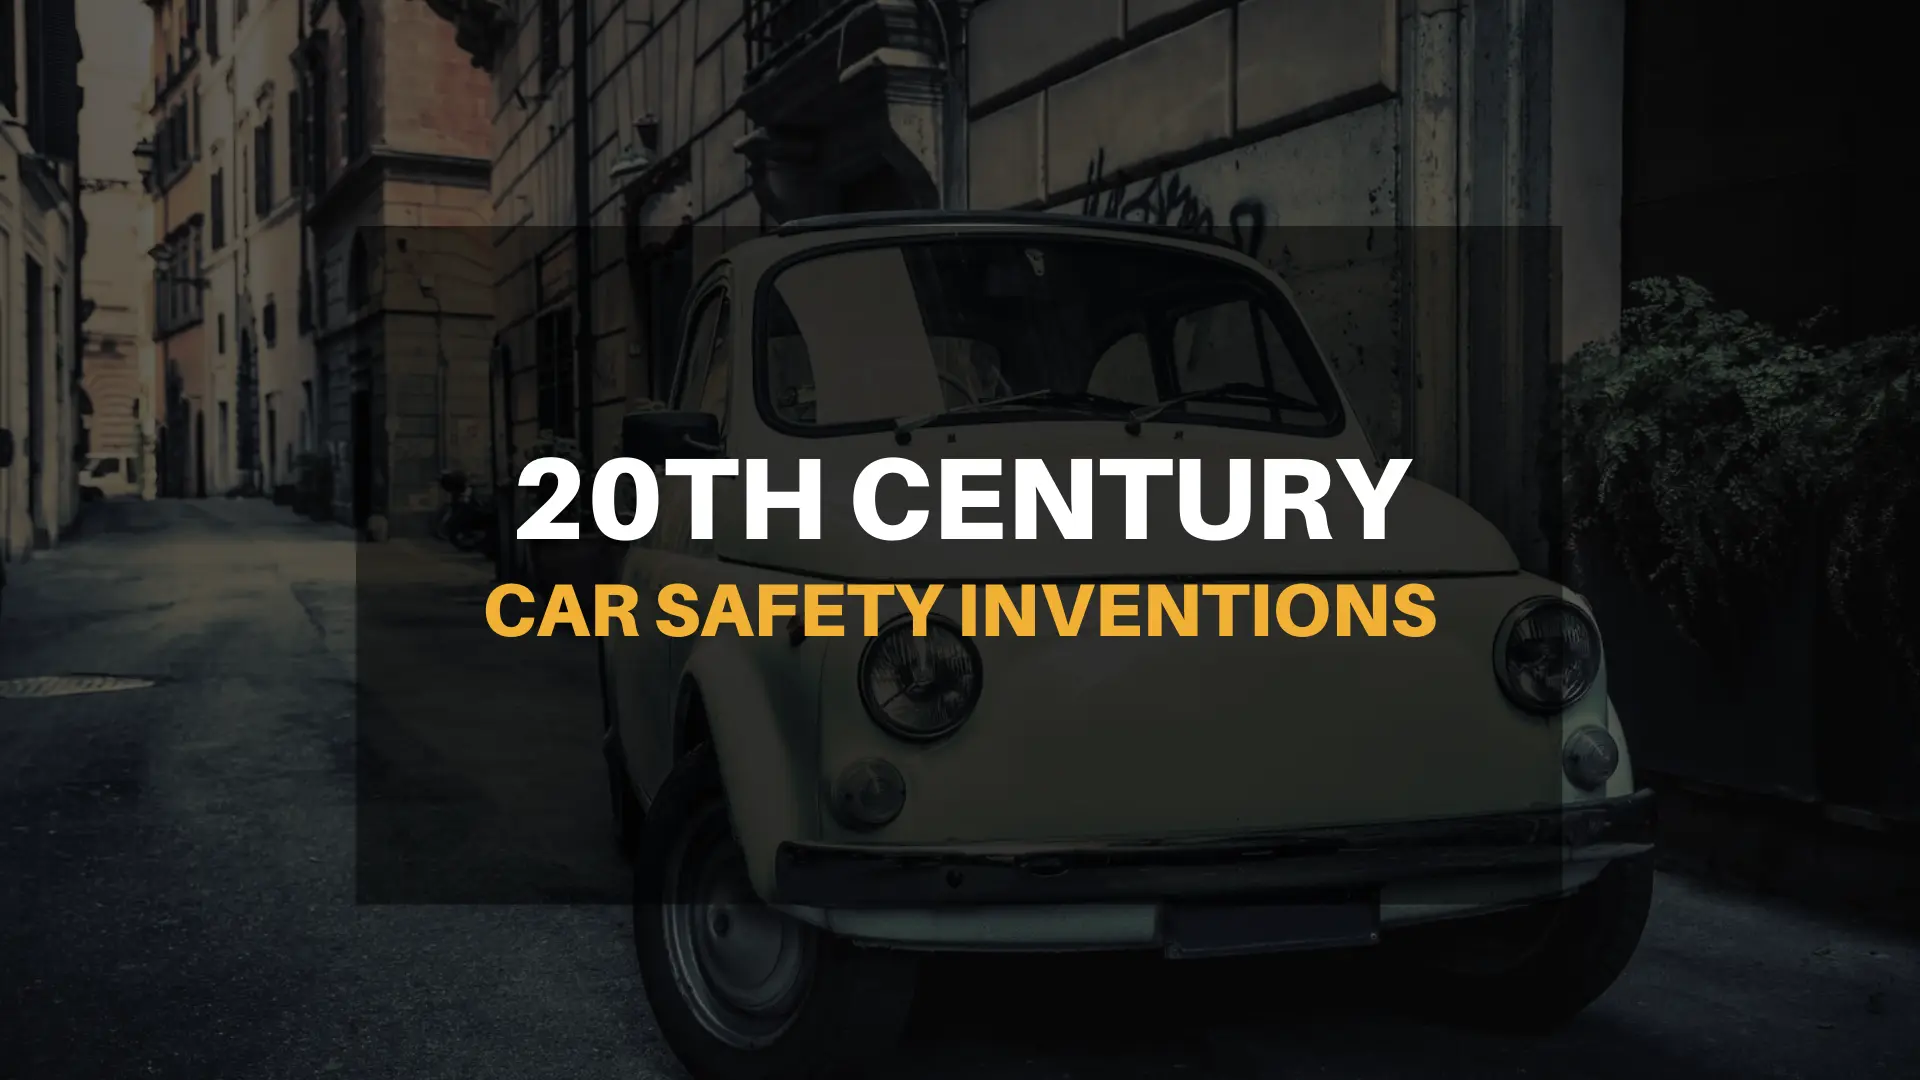 20th century car safety inventions